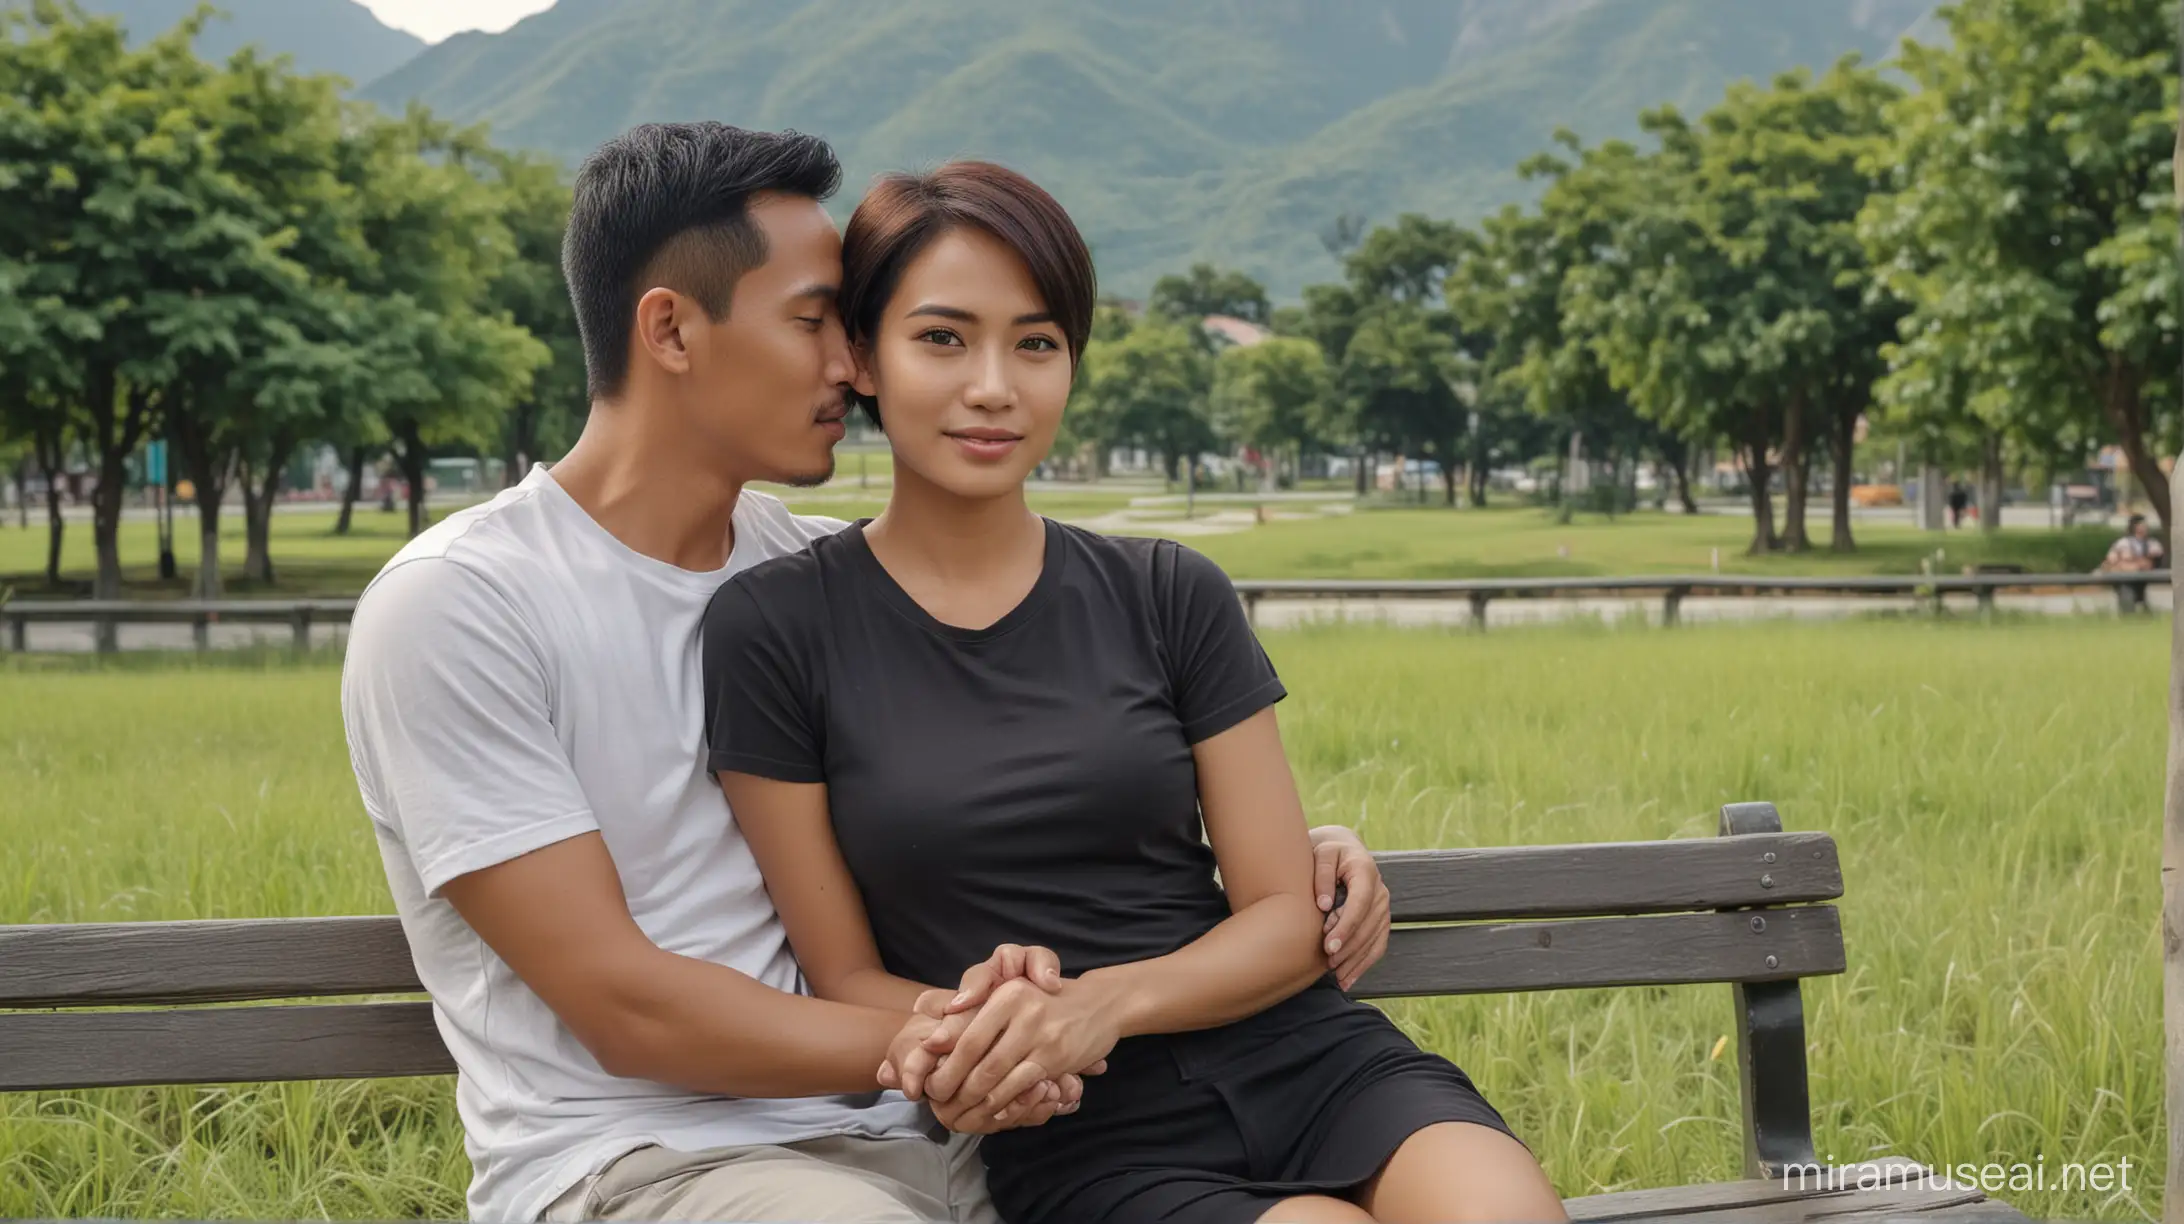 Romantic Embrace of Indonesian Man and High School Woman on Park Bench